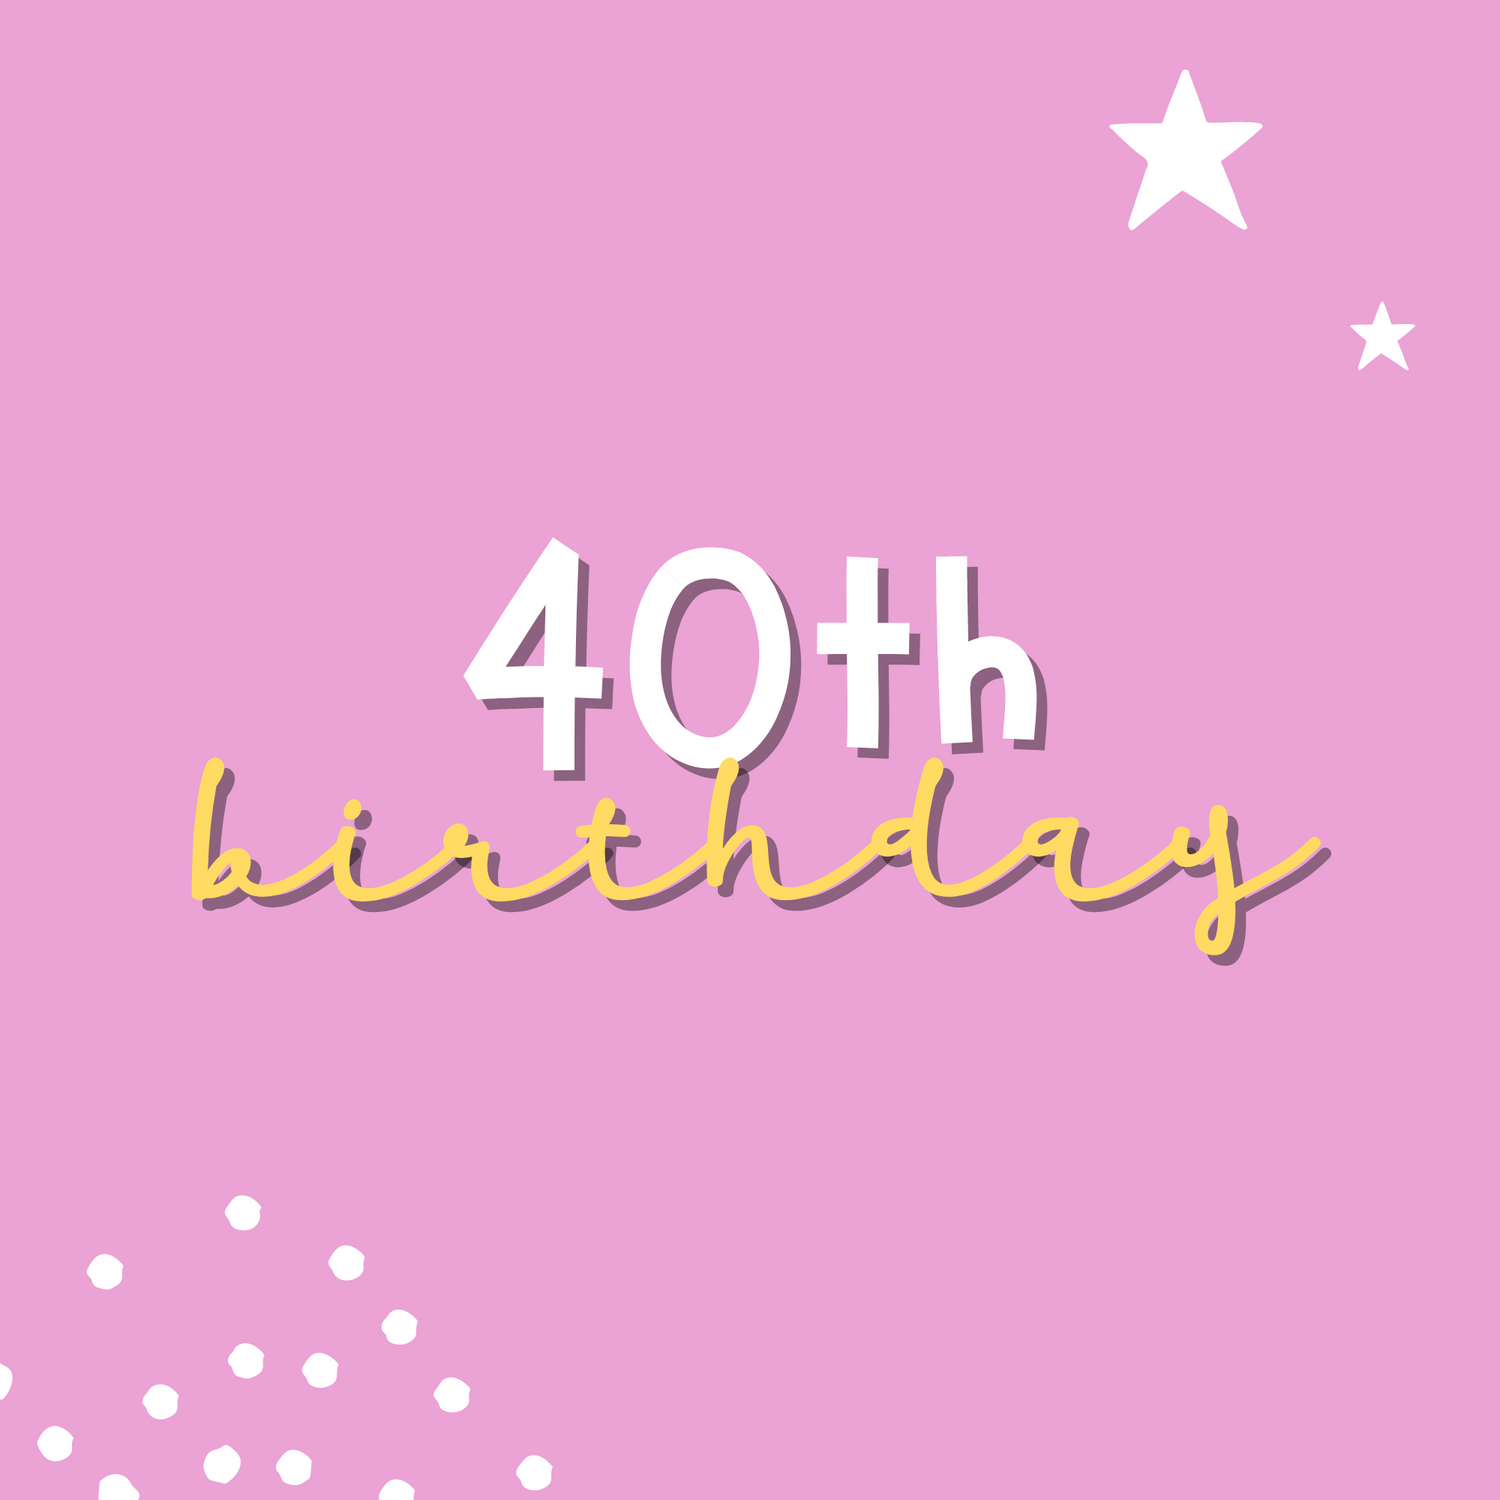 40th birthday cake toppers